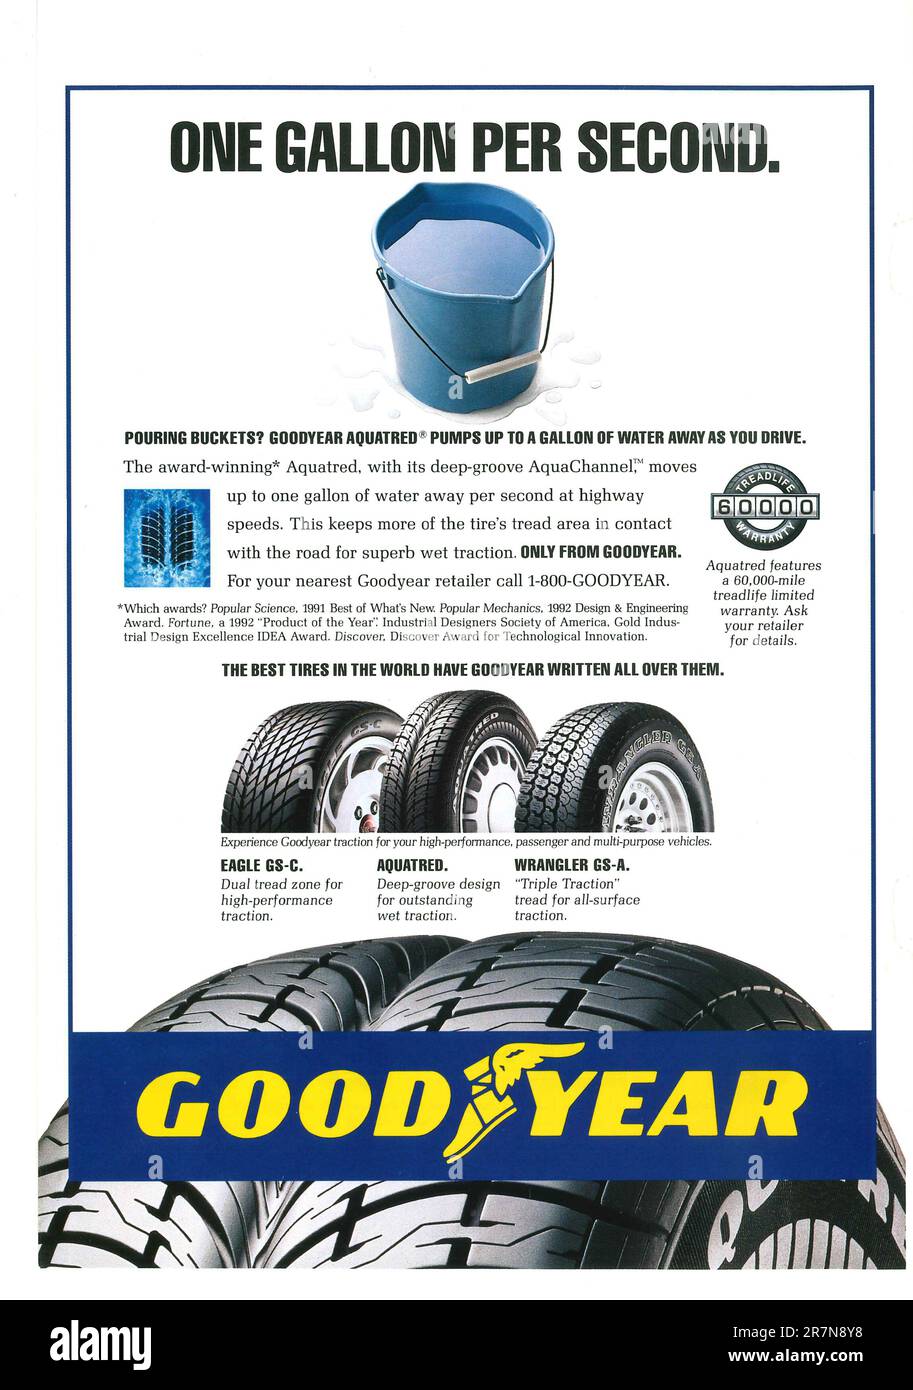 Goodyear tire advert in a magazine 1993. Goodyear Eagle, Aquatred, Wrangler tires advertising. One Gallon Per Second campaign Stock Photo